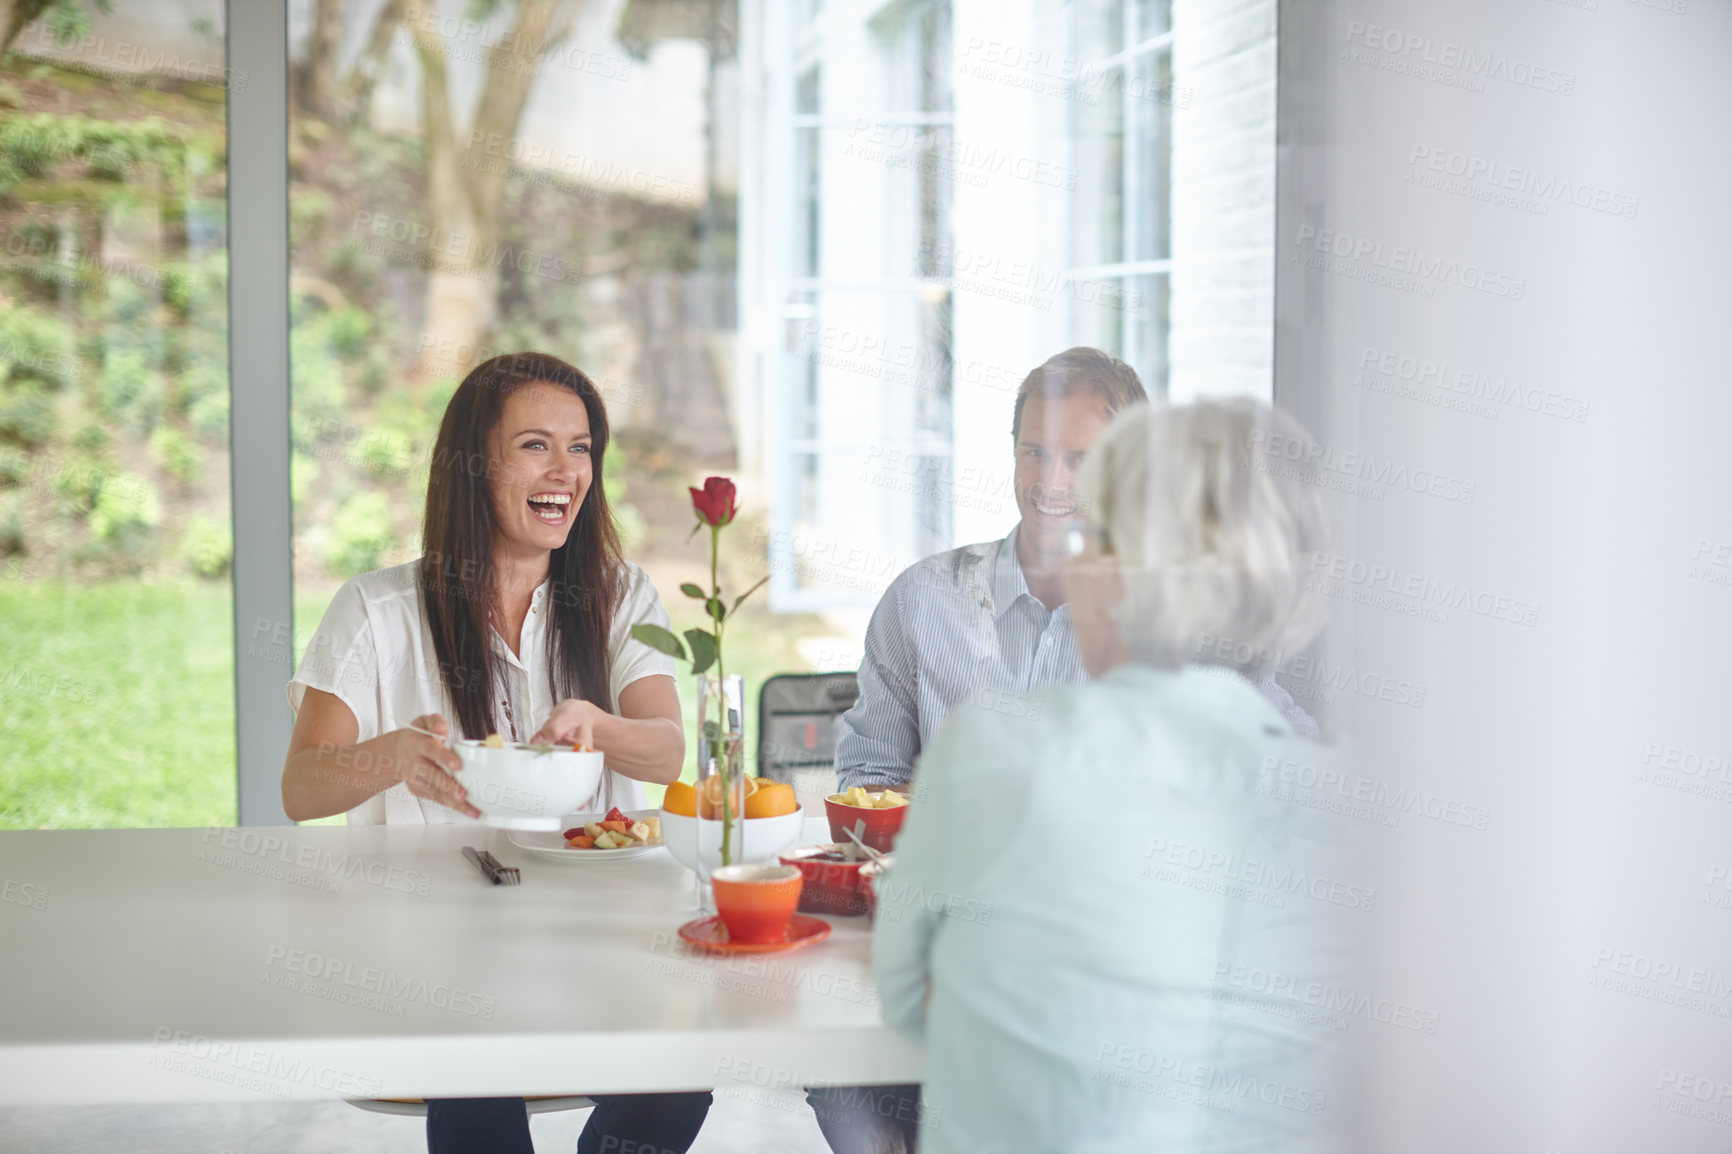 Buy stock photo Shot of a family eating together at home